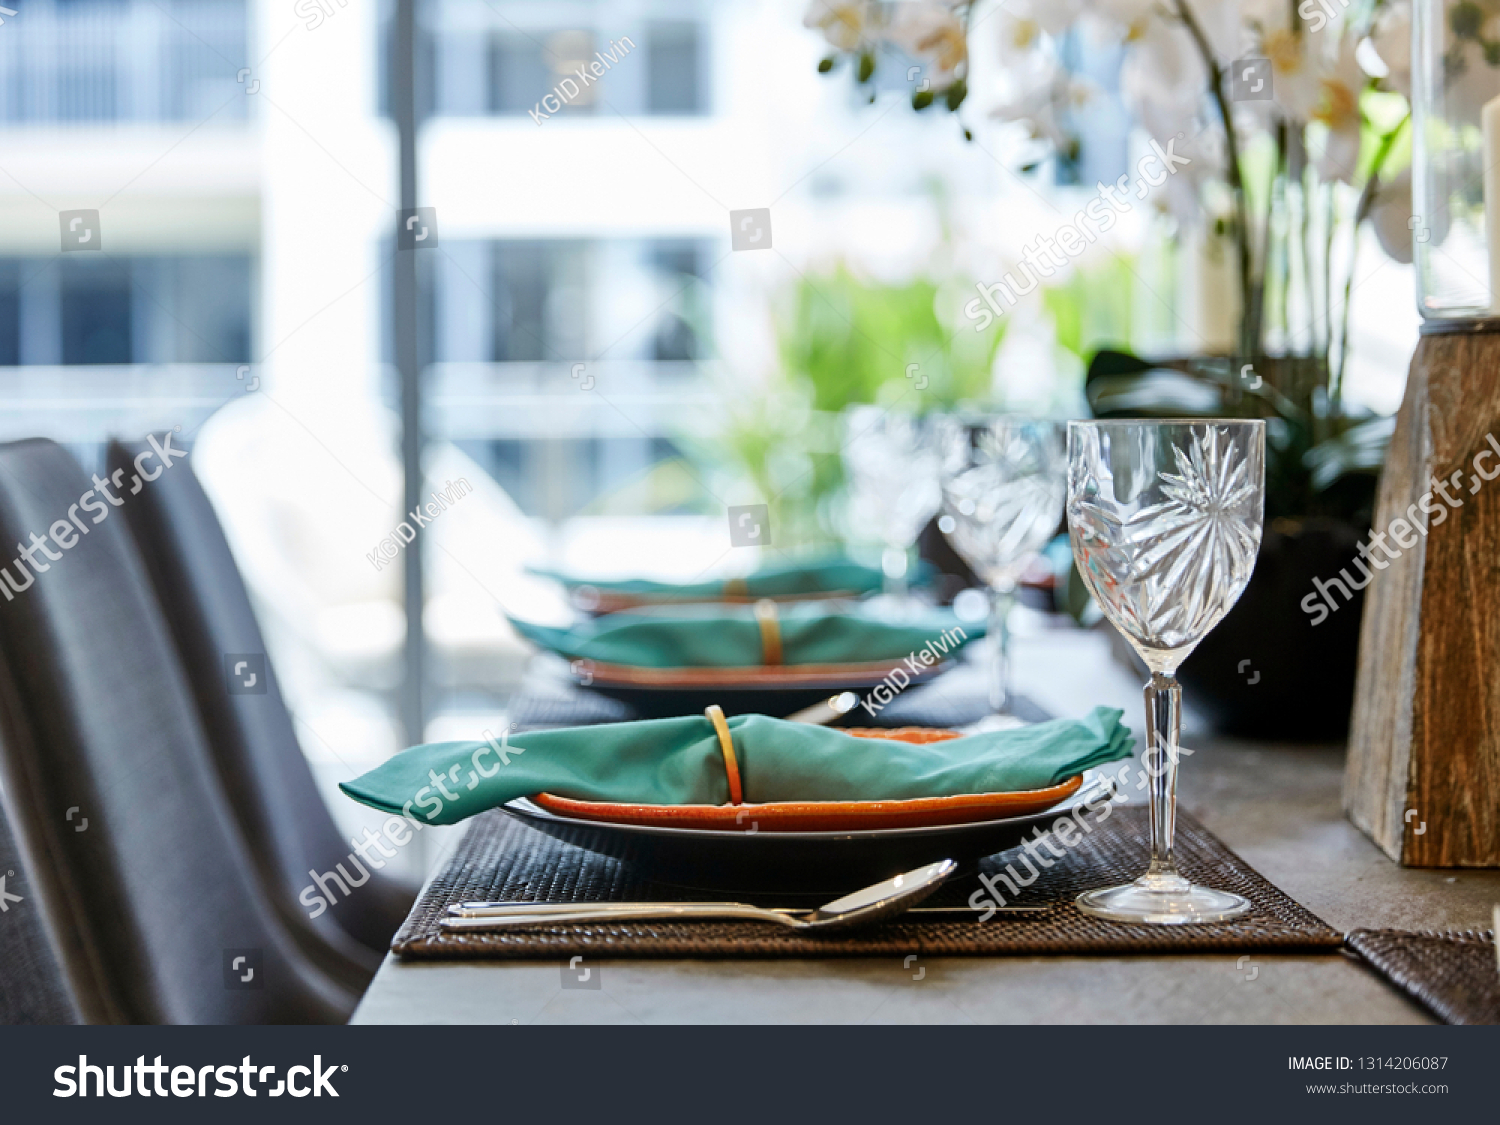  colourful dining decorations  #1314206087